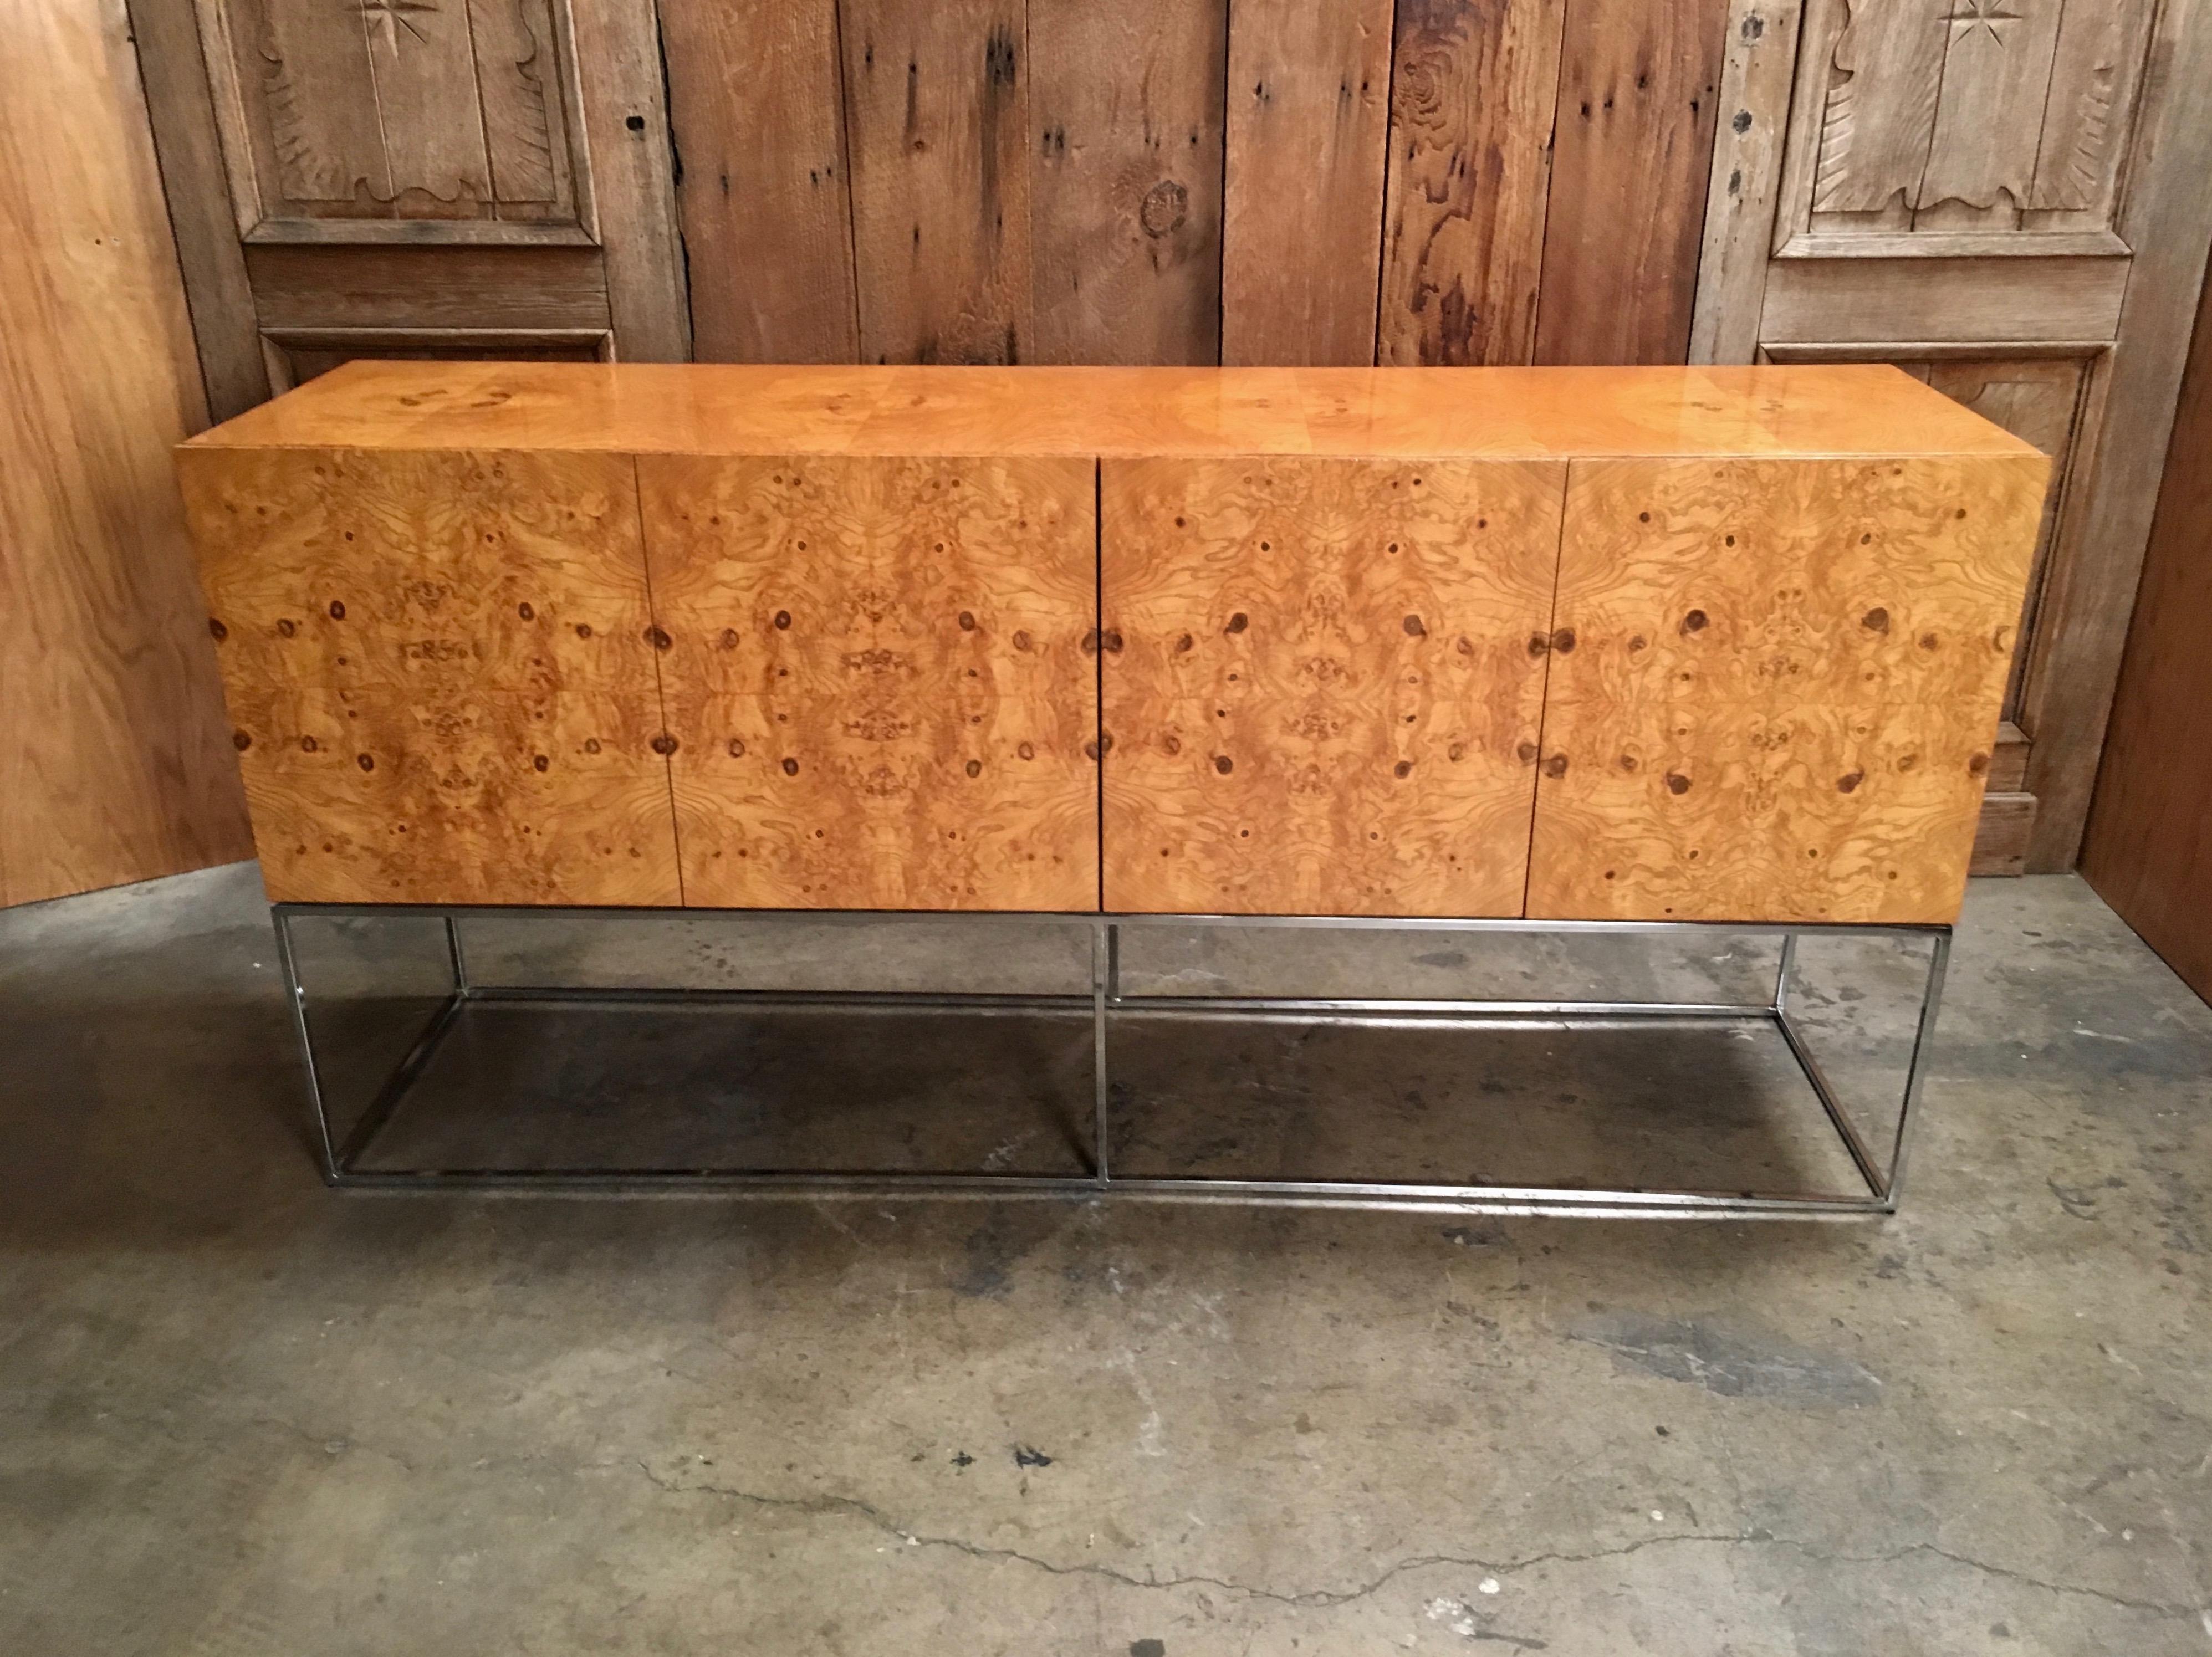 Milo Baughman for Thayer Coggin burl wood credenza with original smoked glass shelf and cutlery inserts.